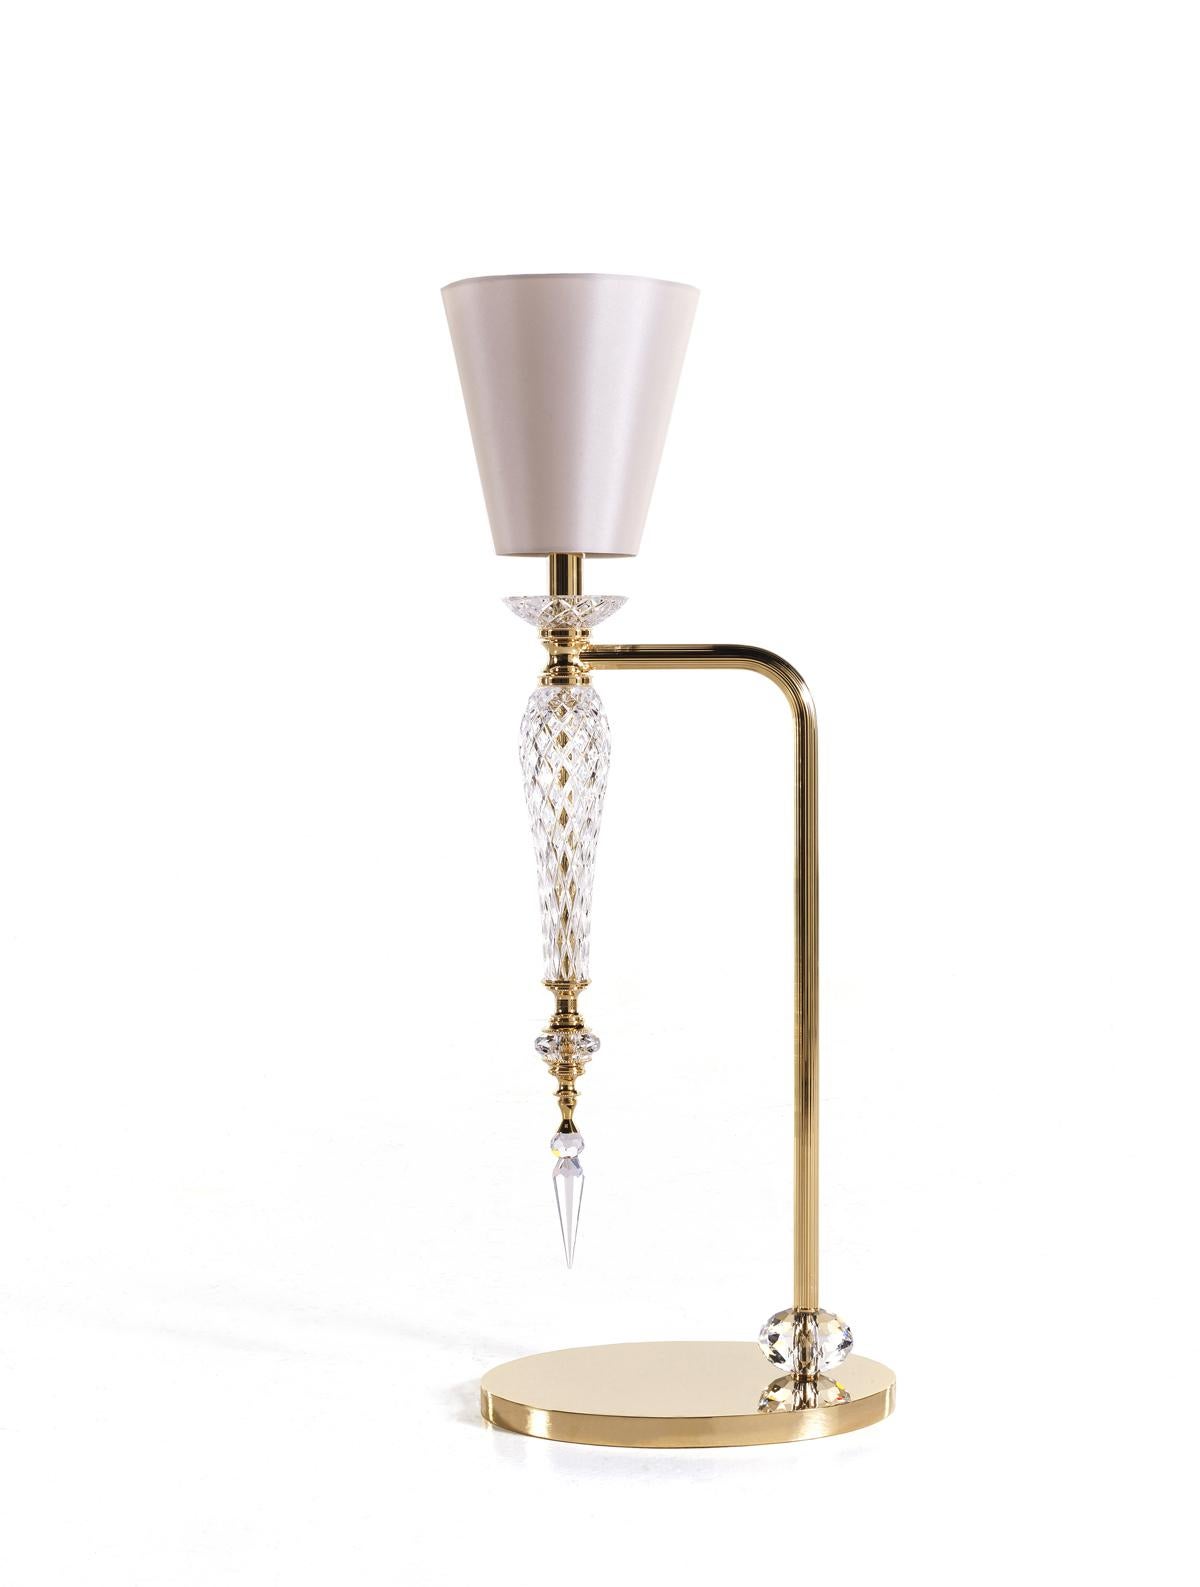 Art Deco L037/T Italian Table Lamp in Crystal and Finishing Gold 24-Karat by Zanaboni For Sale